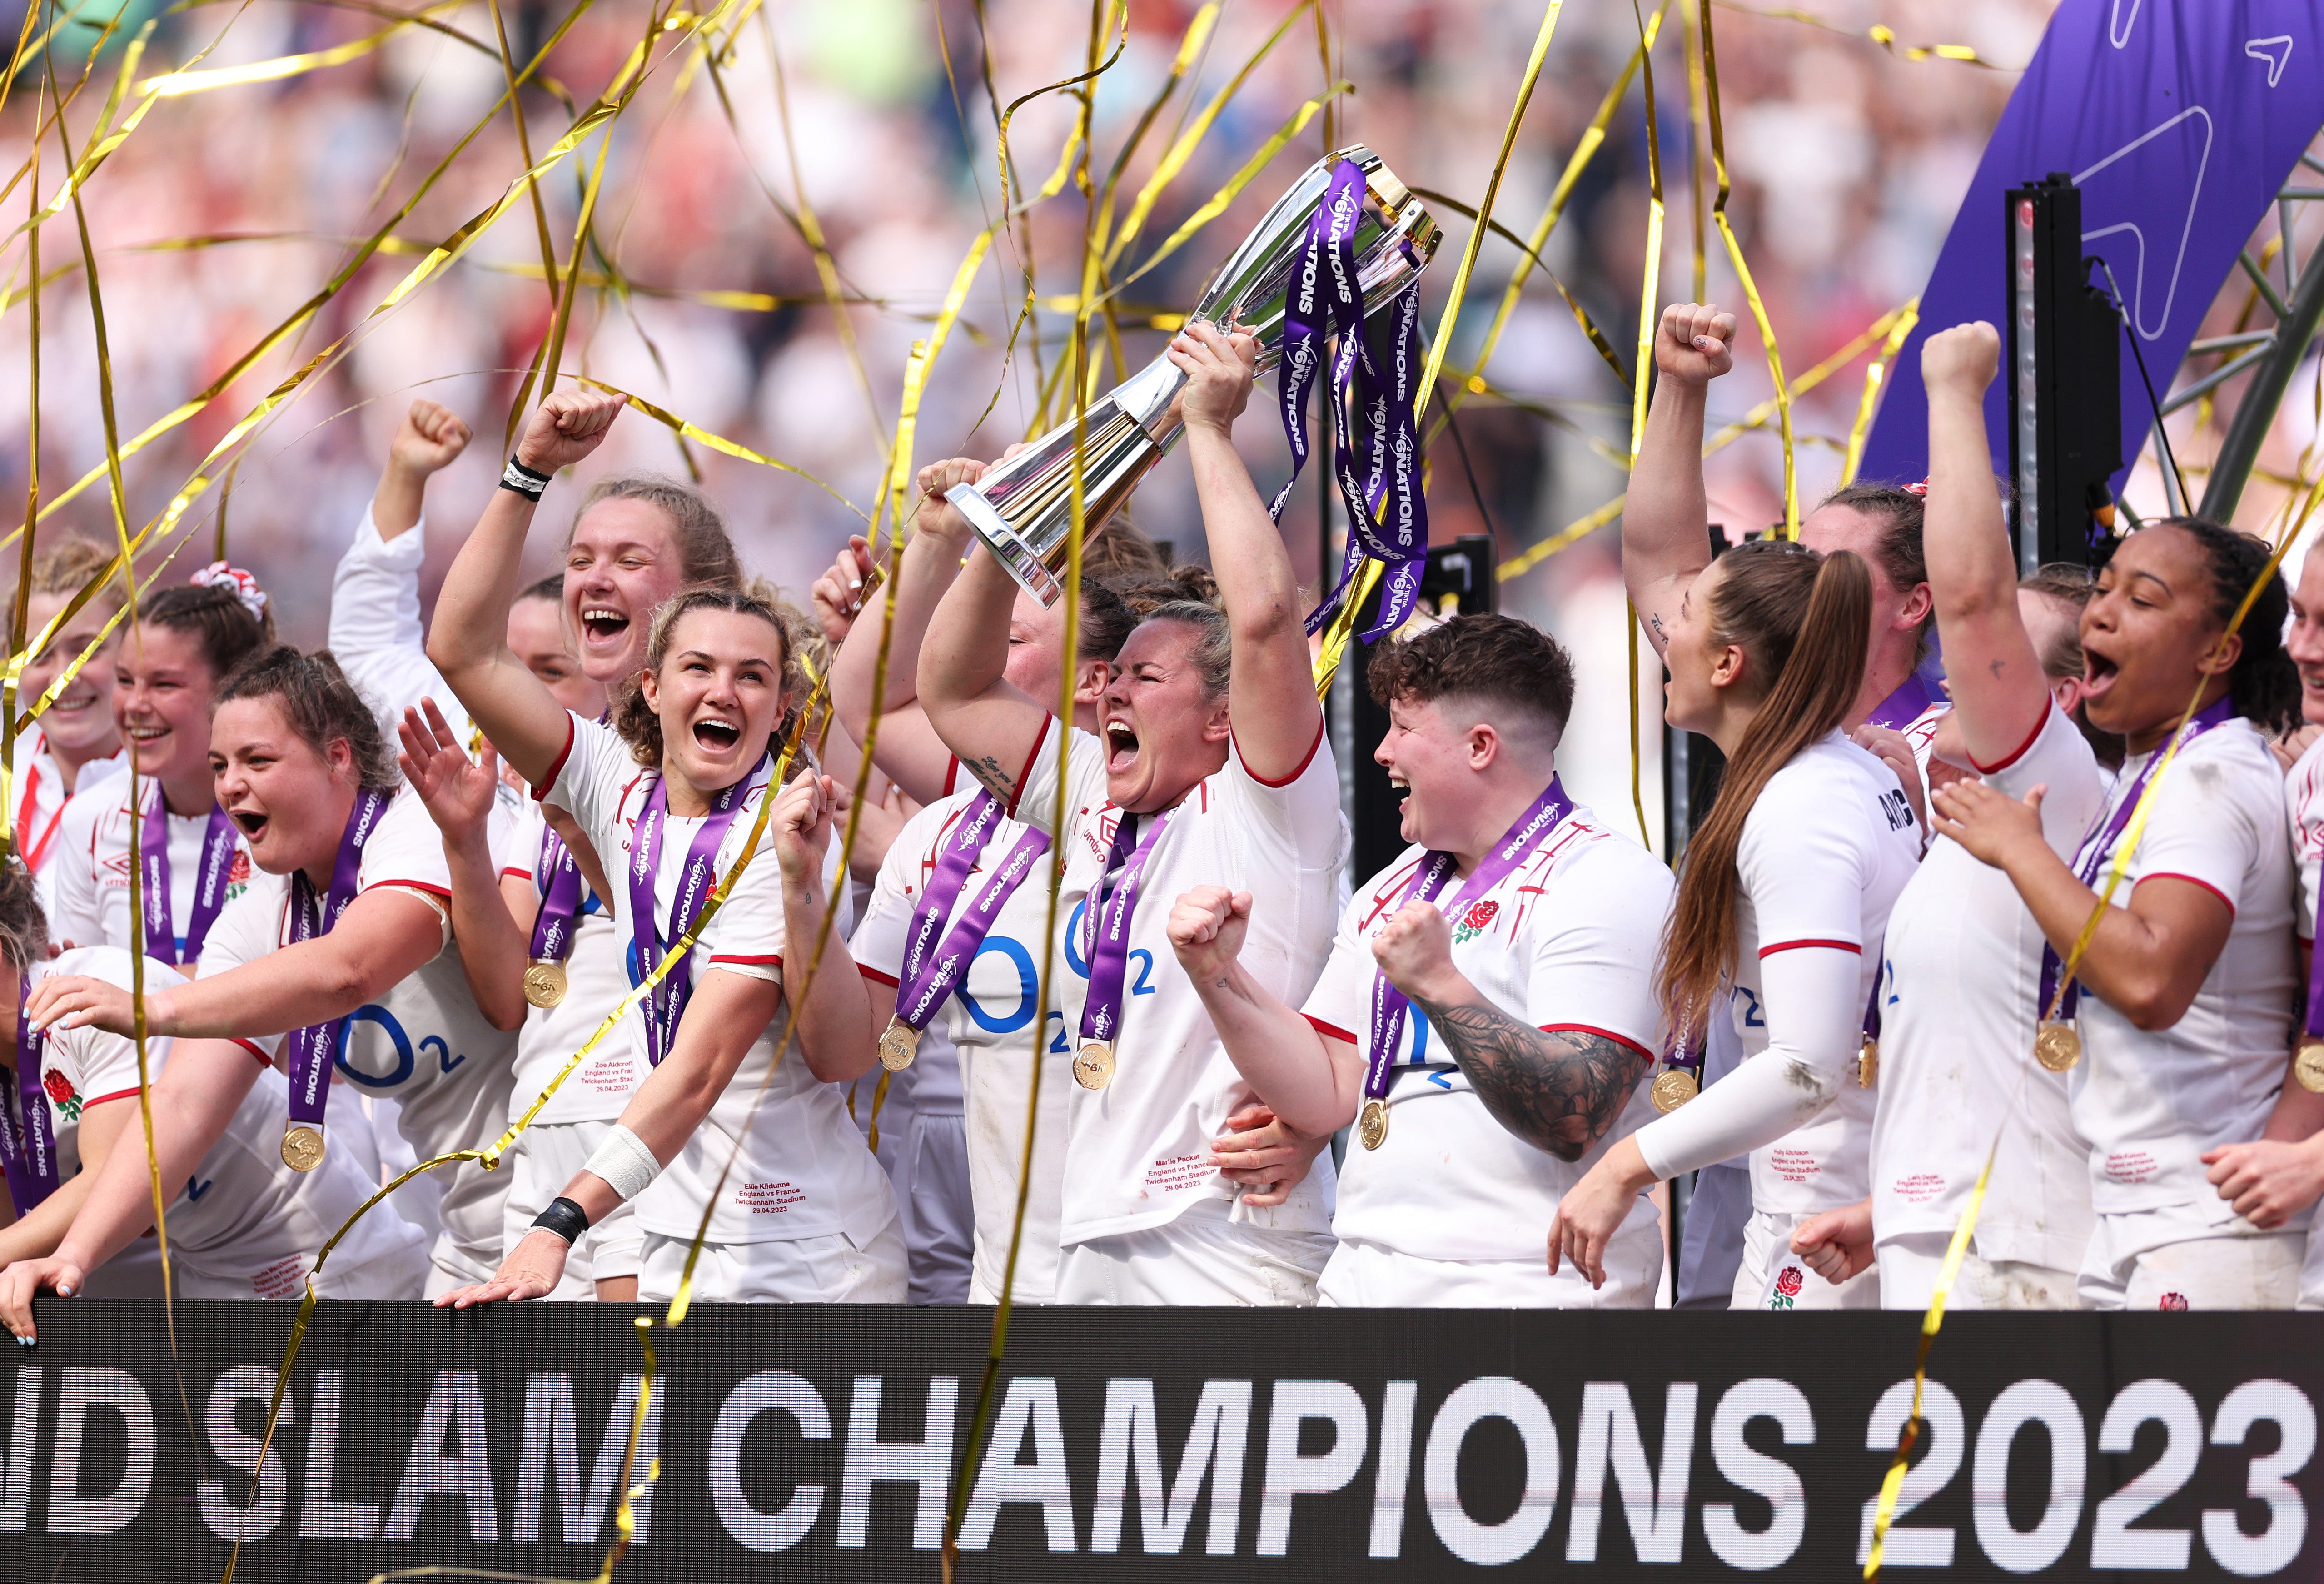 England continued their recent dominance of the Women’s Six Nations